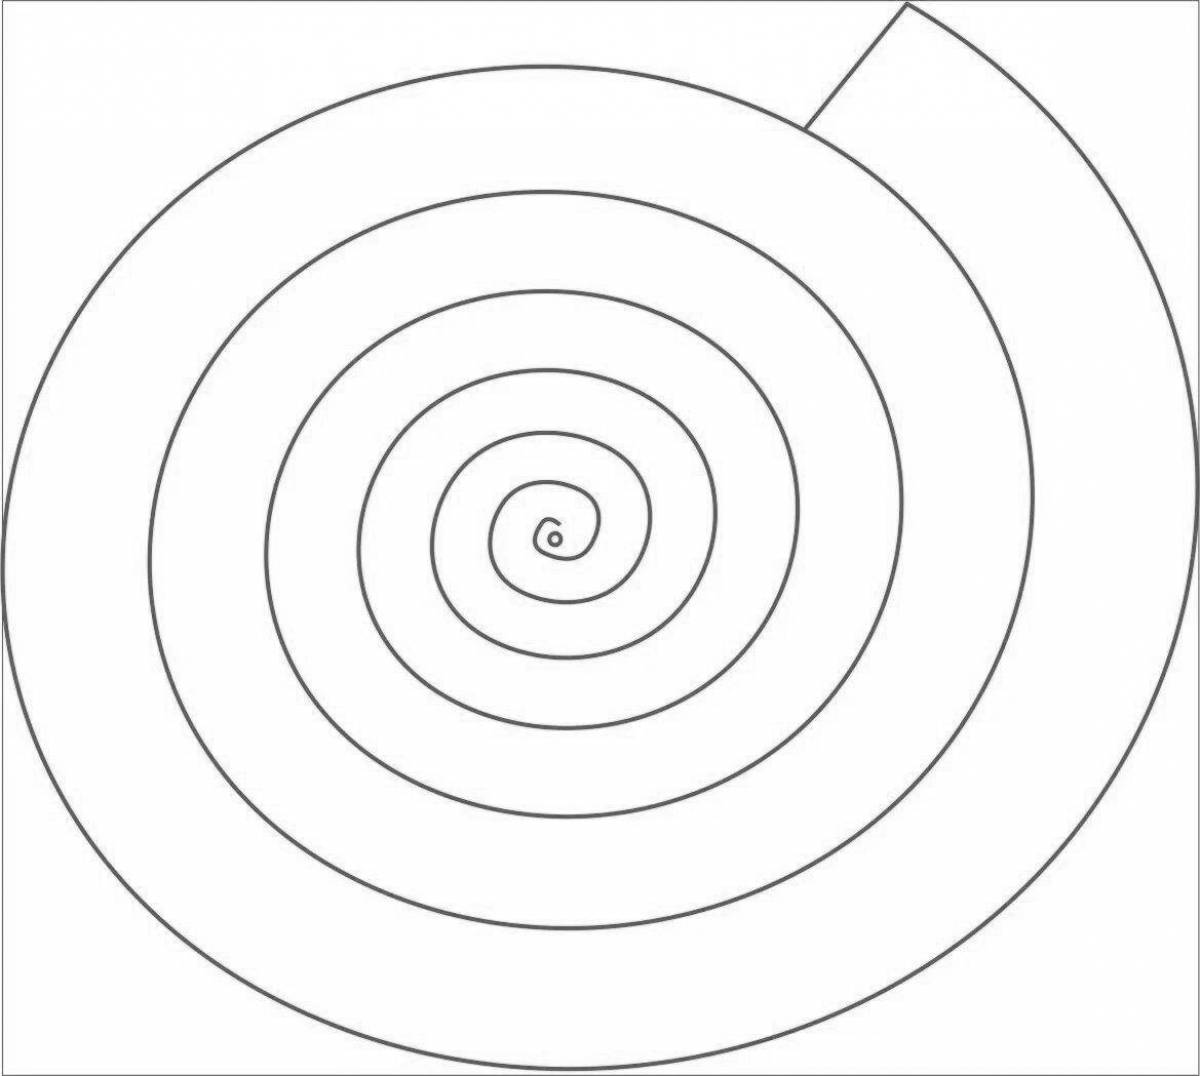 Coloring page winding spiral